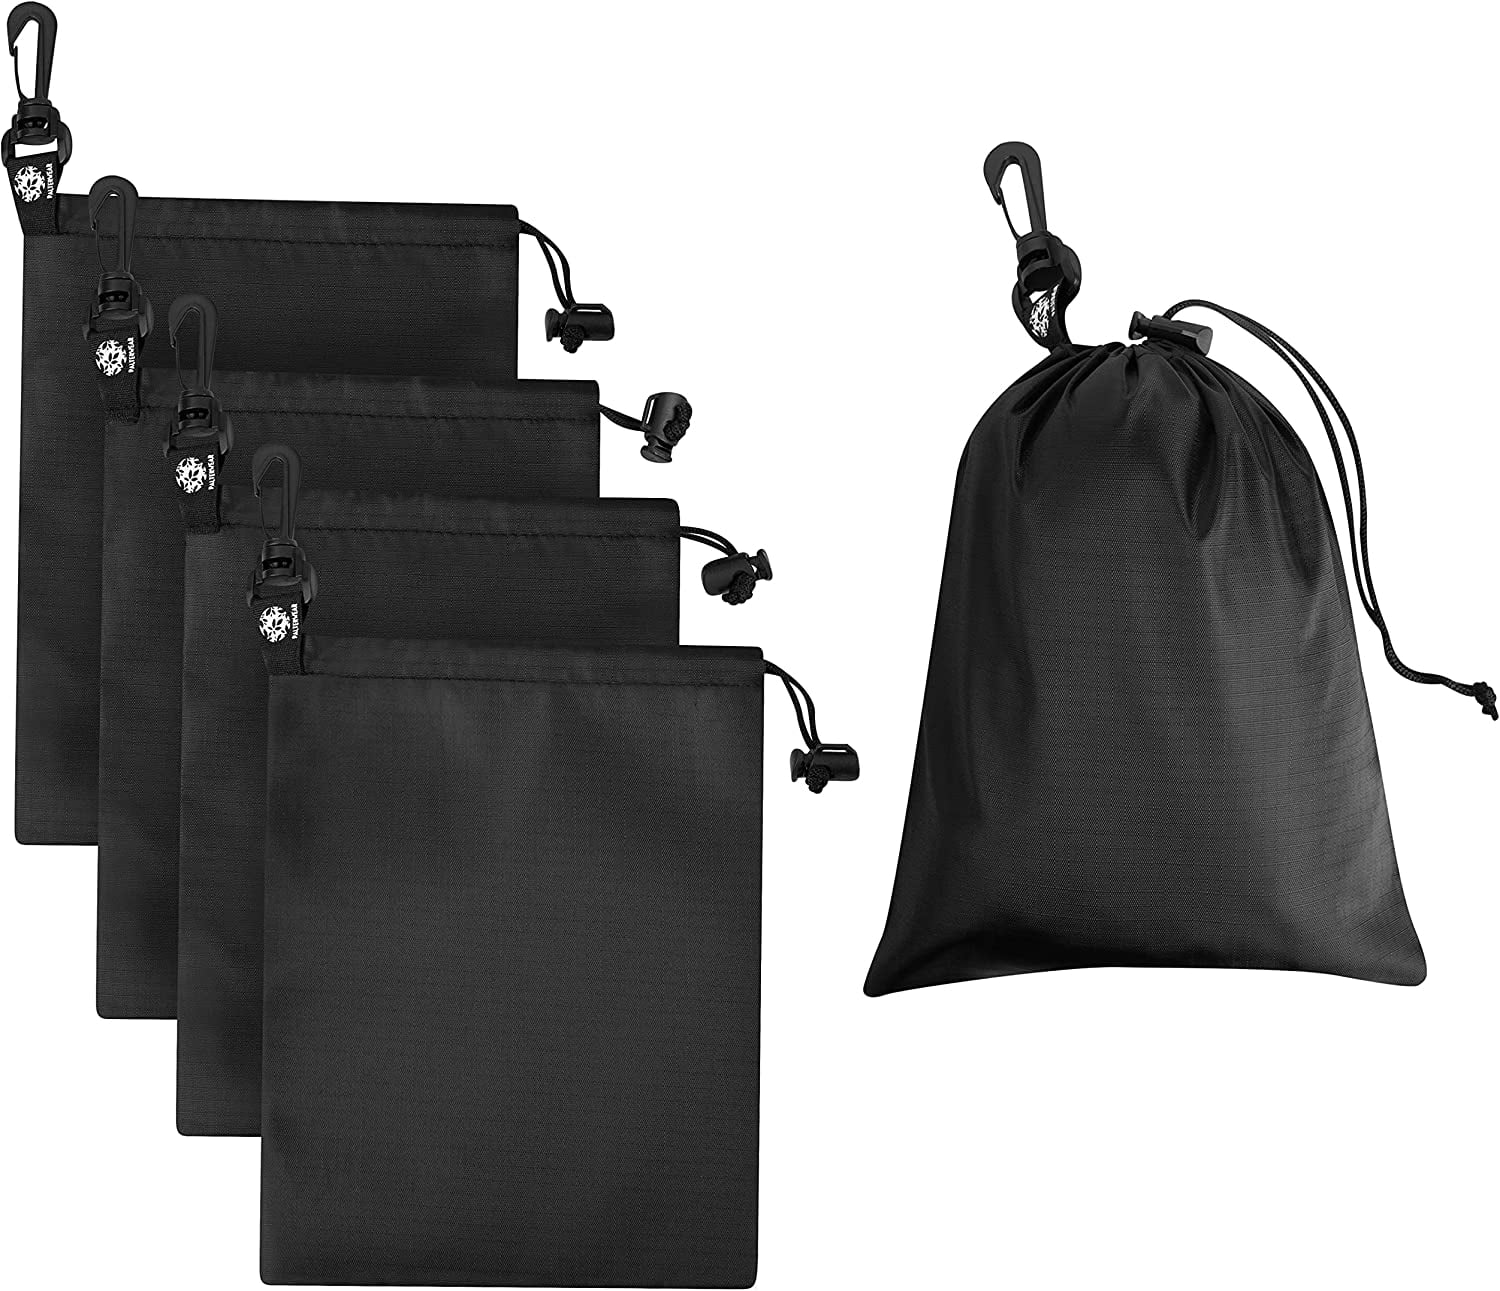 PALTERWEAR Drawstring Bag - Cinch and Ditty Pouch with Clip for Travel,  Outdoor, Sports - Set of 5 (7 x 9 inch, Black)